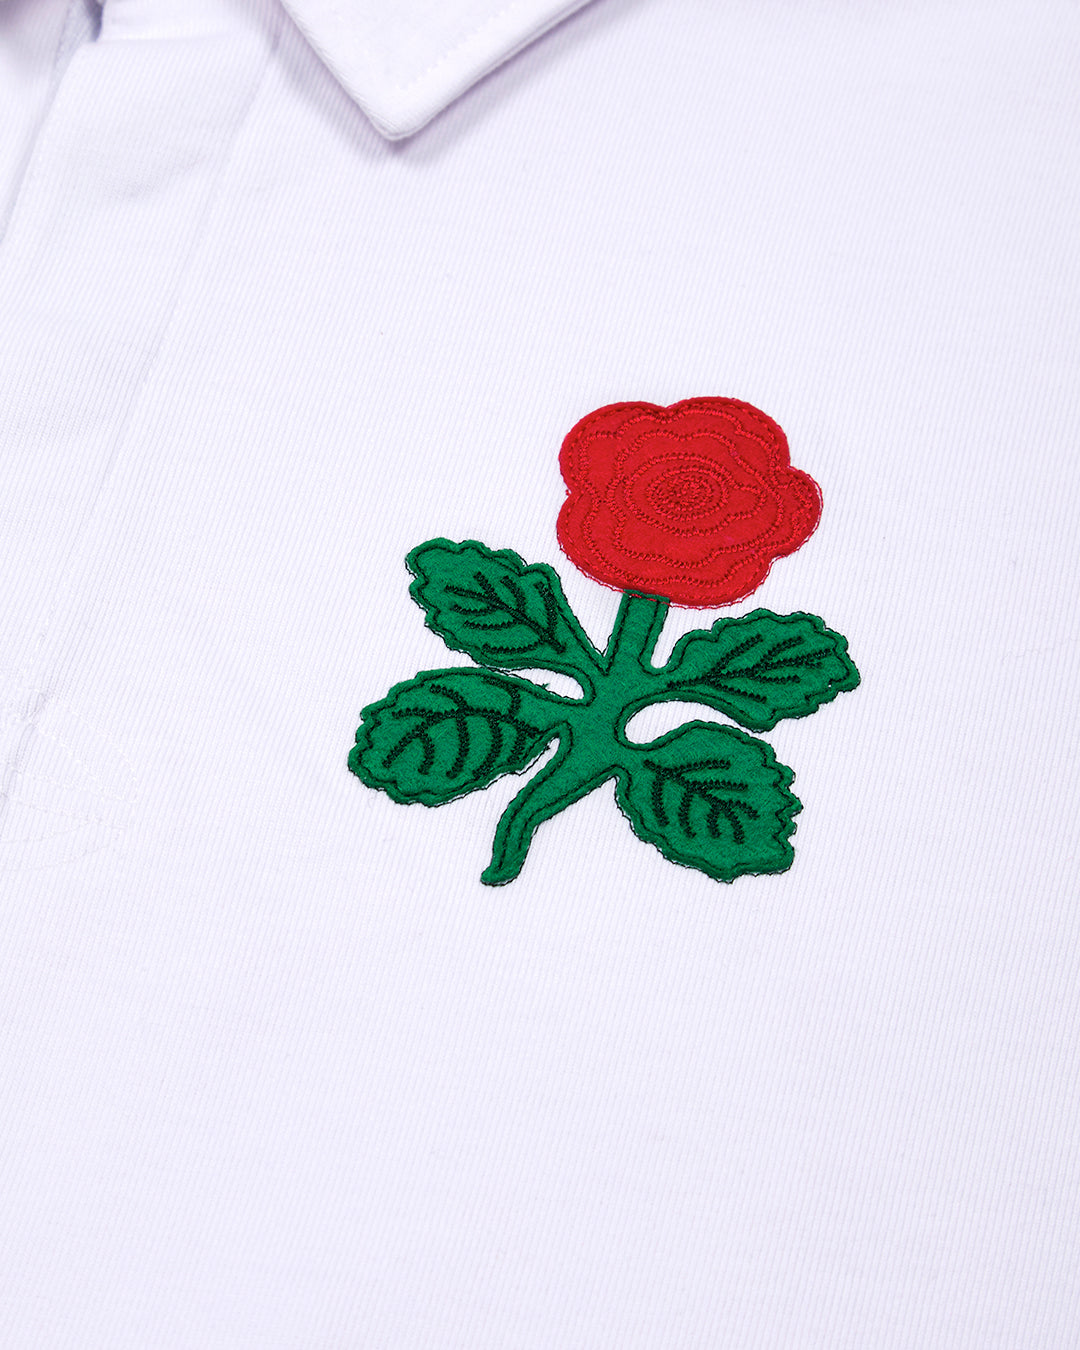 VC: GB-ENG - Women's Vintage White Rugby Shirt - England